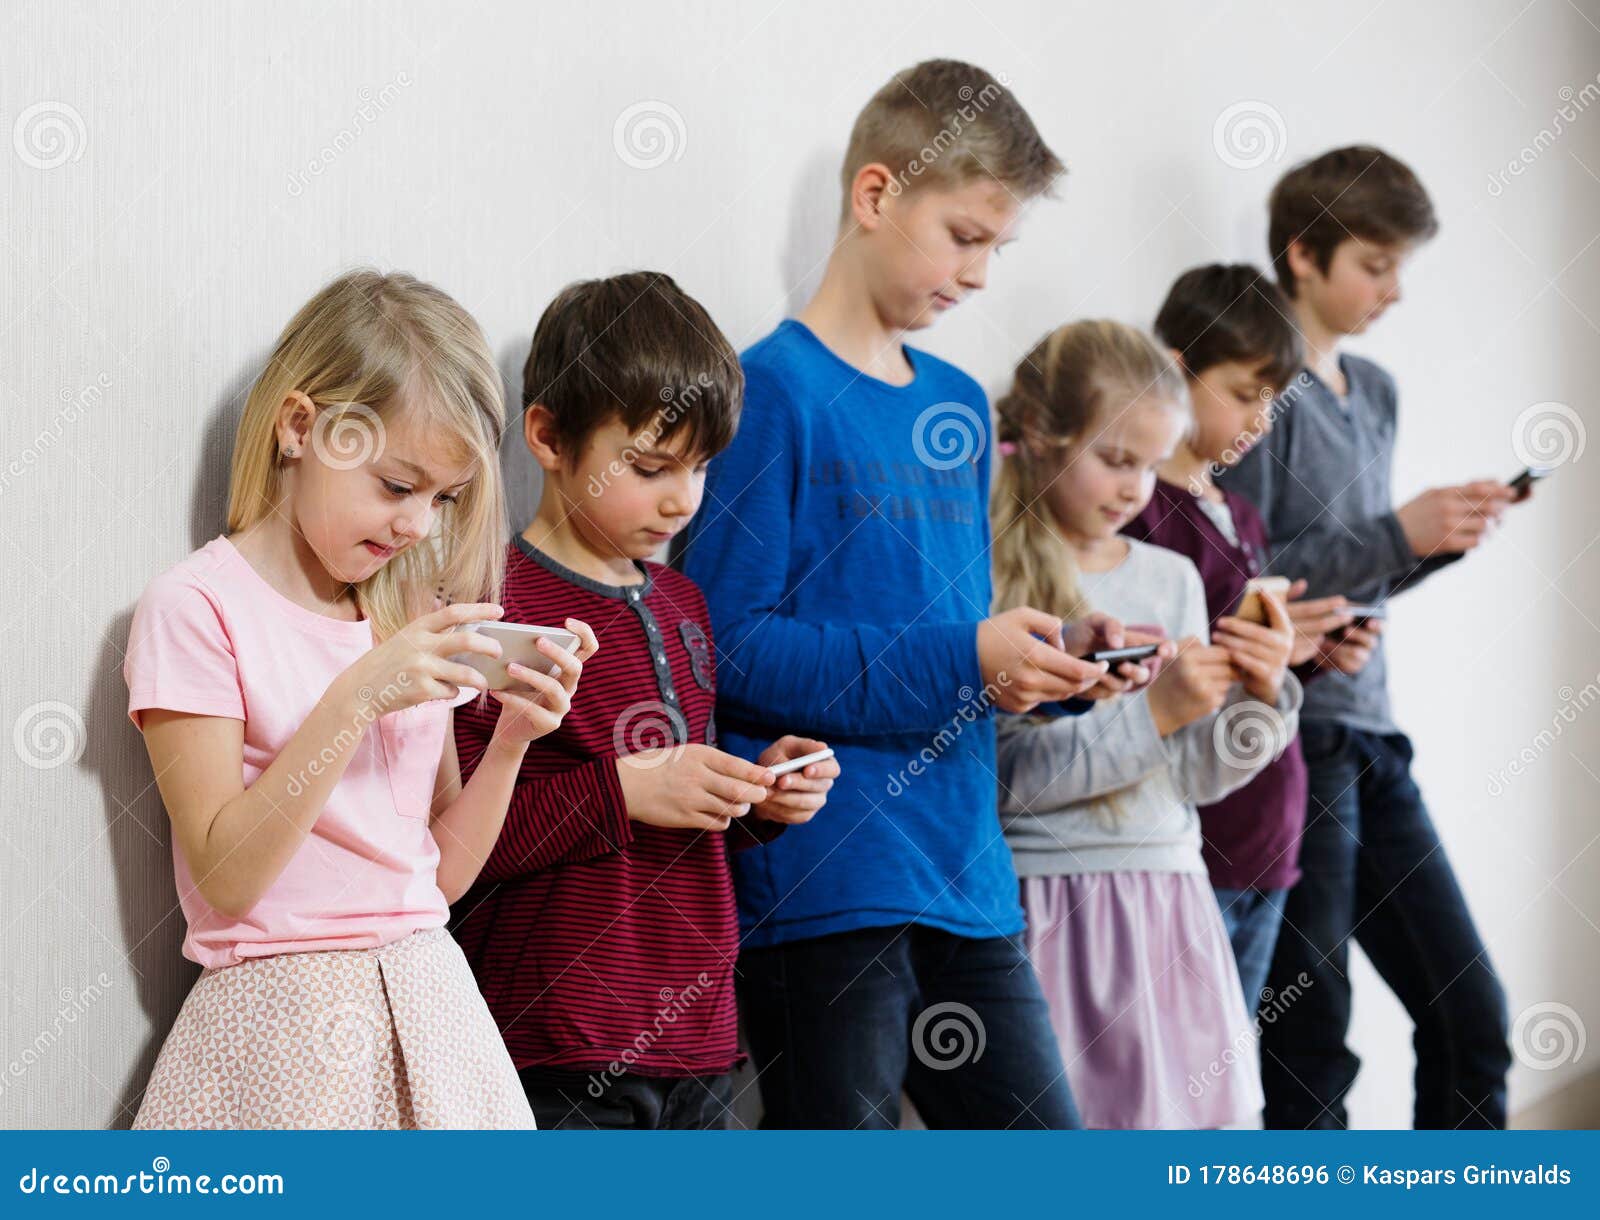 kids using their mobile phones